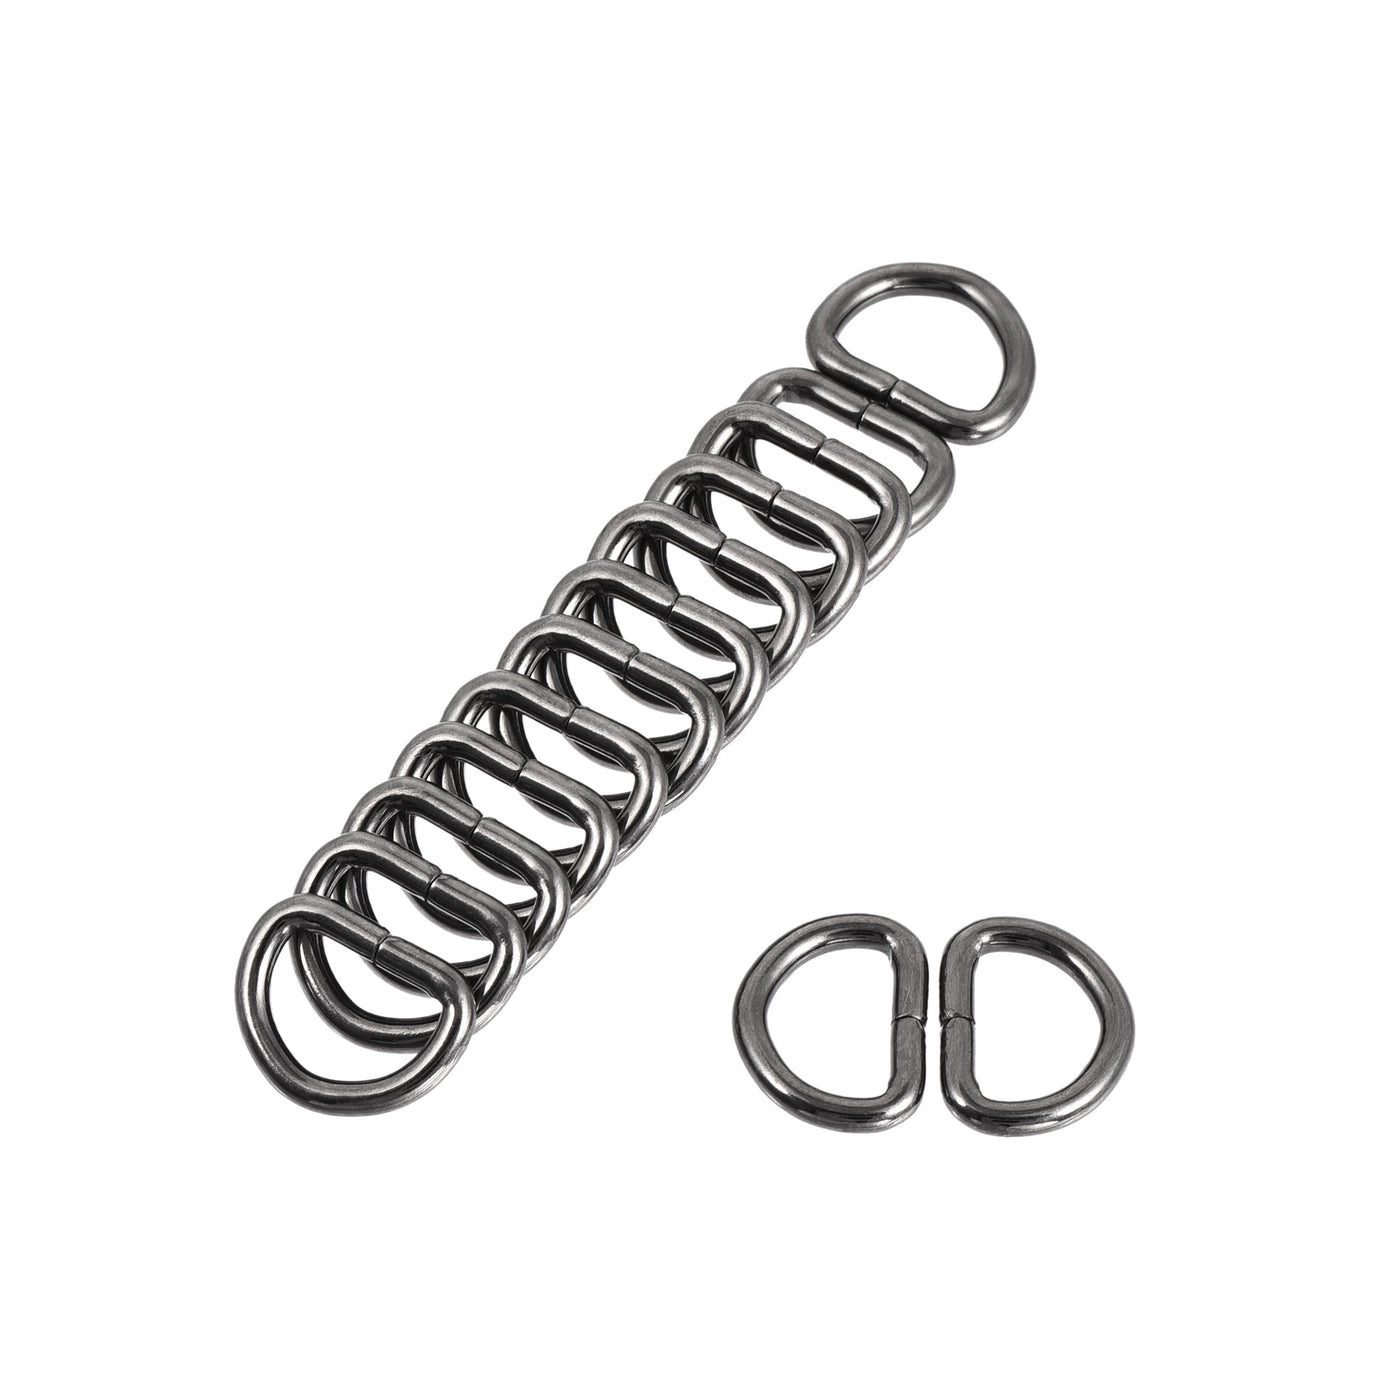 uxcell Uxcell Metal D Ring 0.51"(13mm) D-Rings Buckle for Hardware Bags Belts Craft DIY Accessories Black 100pcs